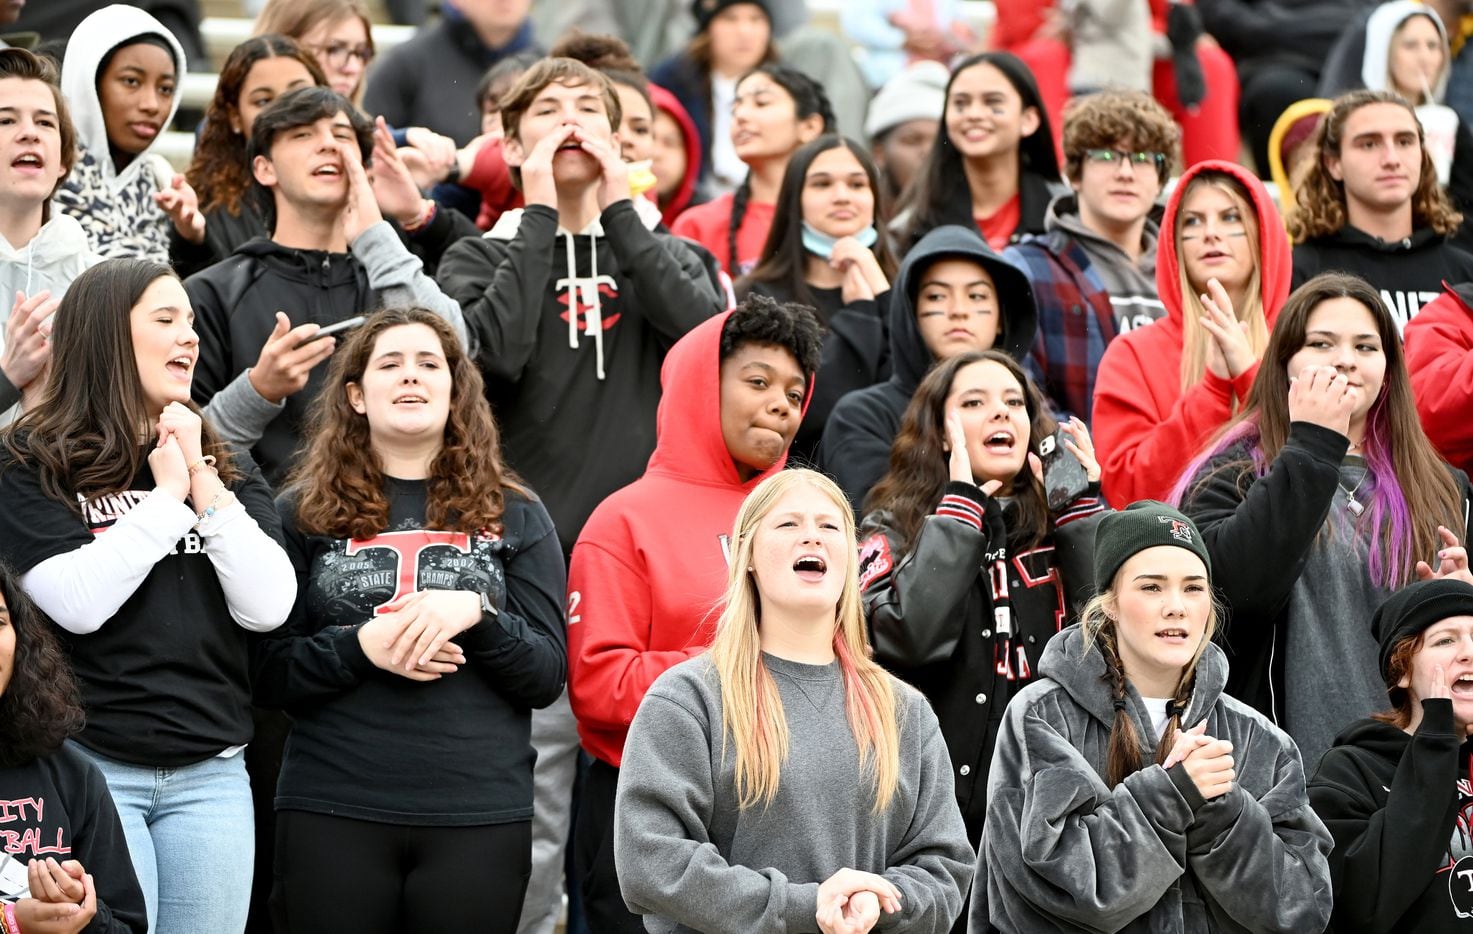 Euless Trinity students cheer in the first half of Class 6A Division I Region I semifinal playoff game between Allen and Euless Trinity, Saturday, Nov. 27, 2021, in Allen, Texas. (Matt Strasen/Special Contributor)